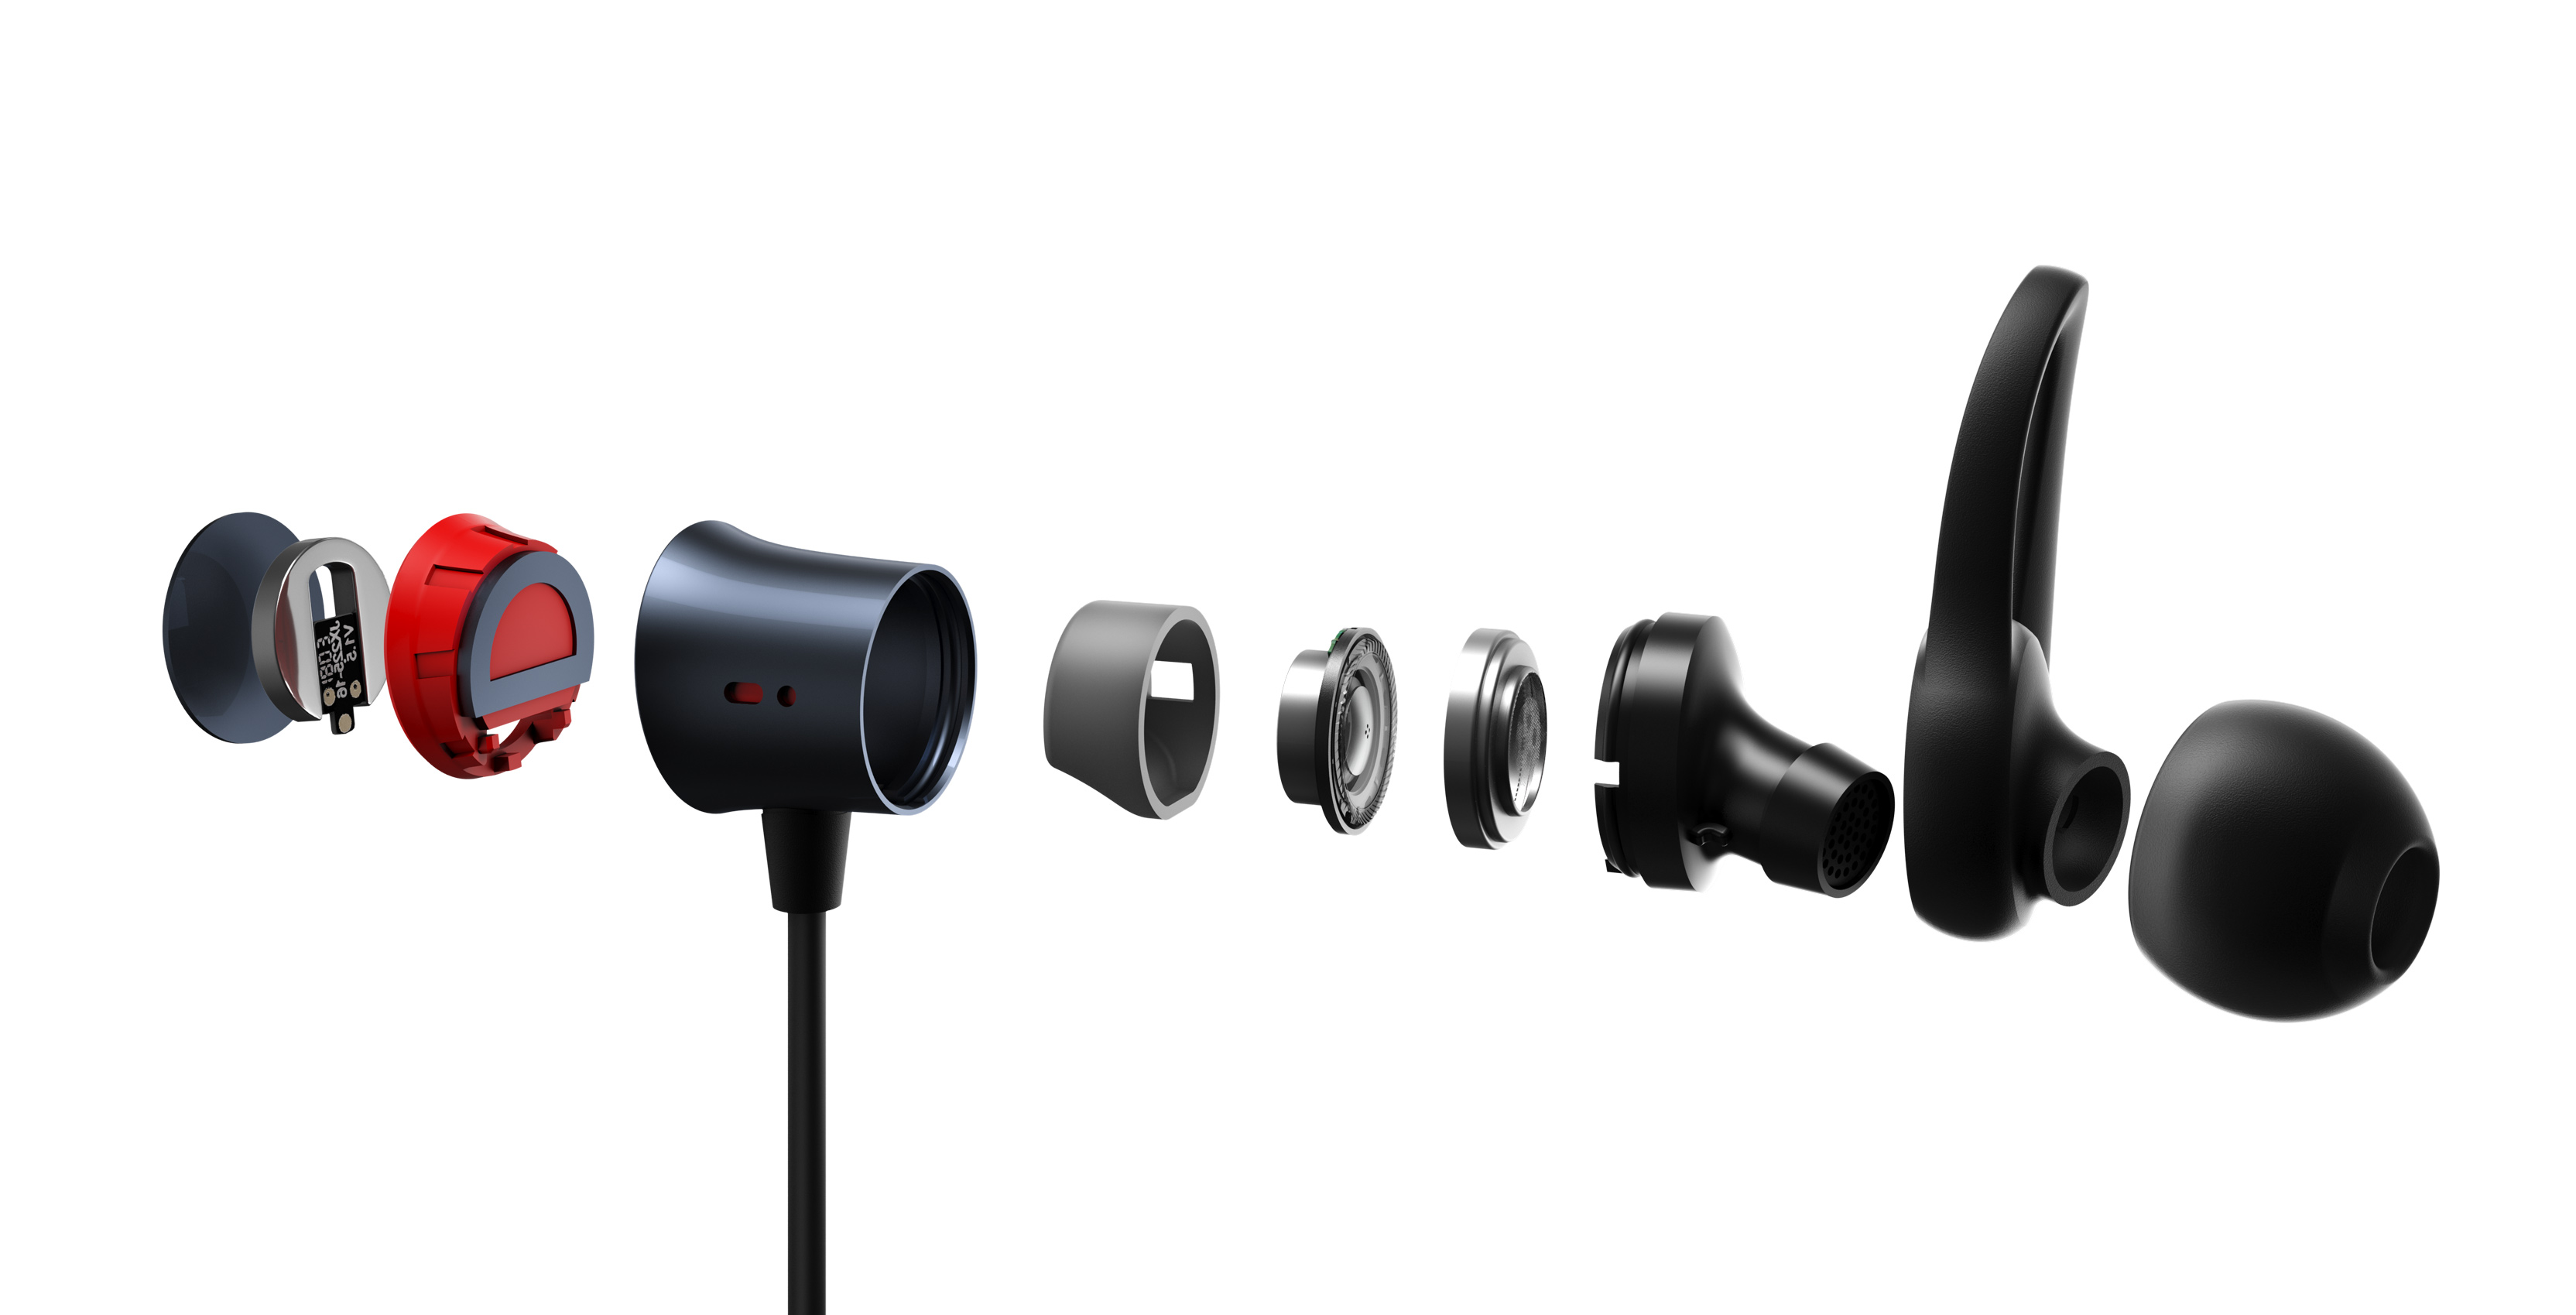 The new OnePlus Bullets Wireless